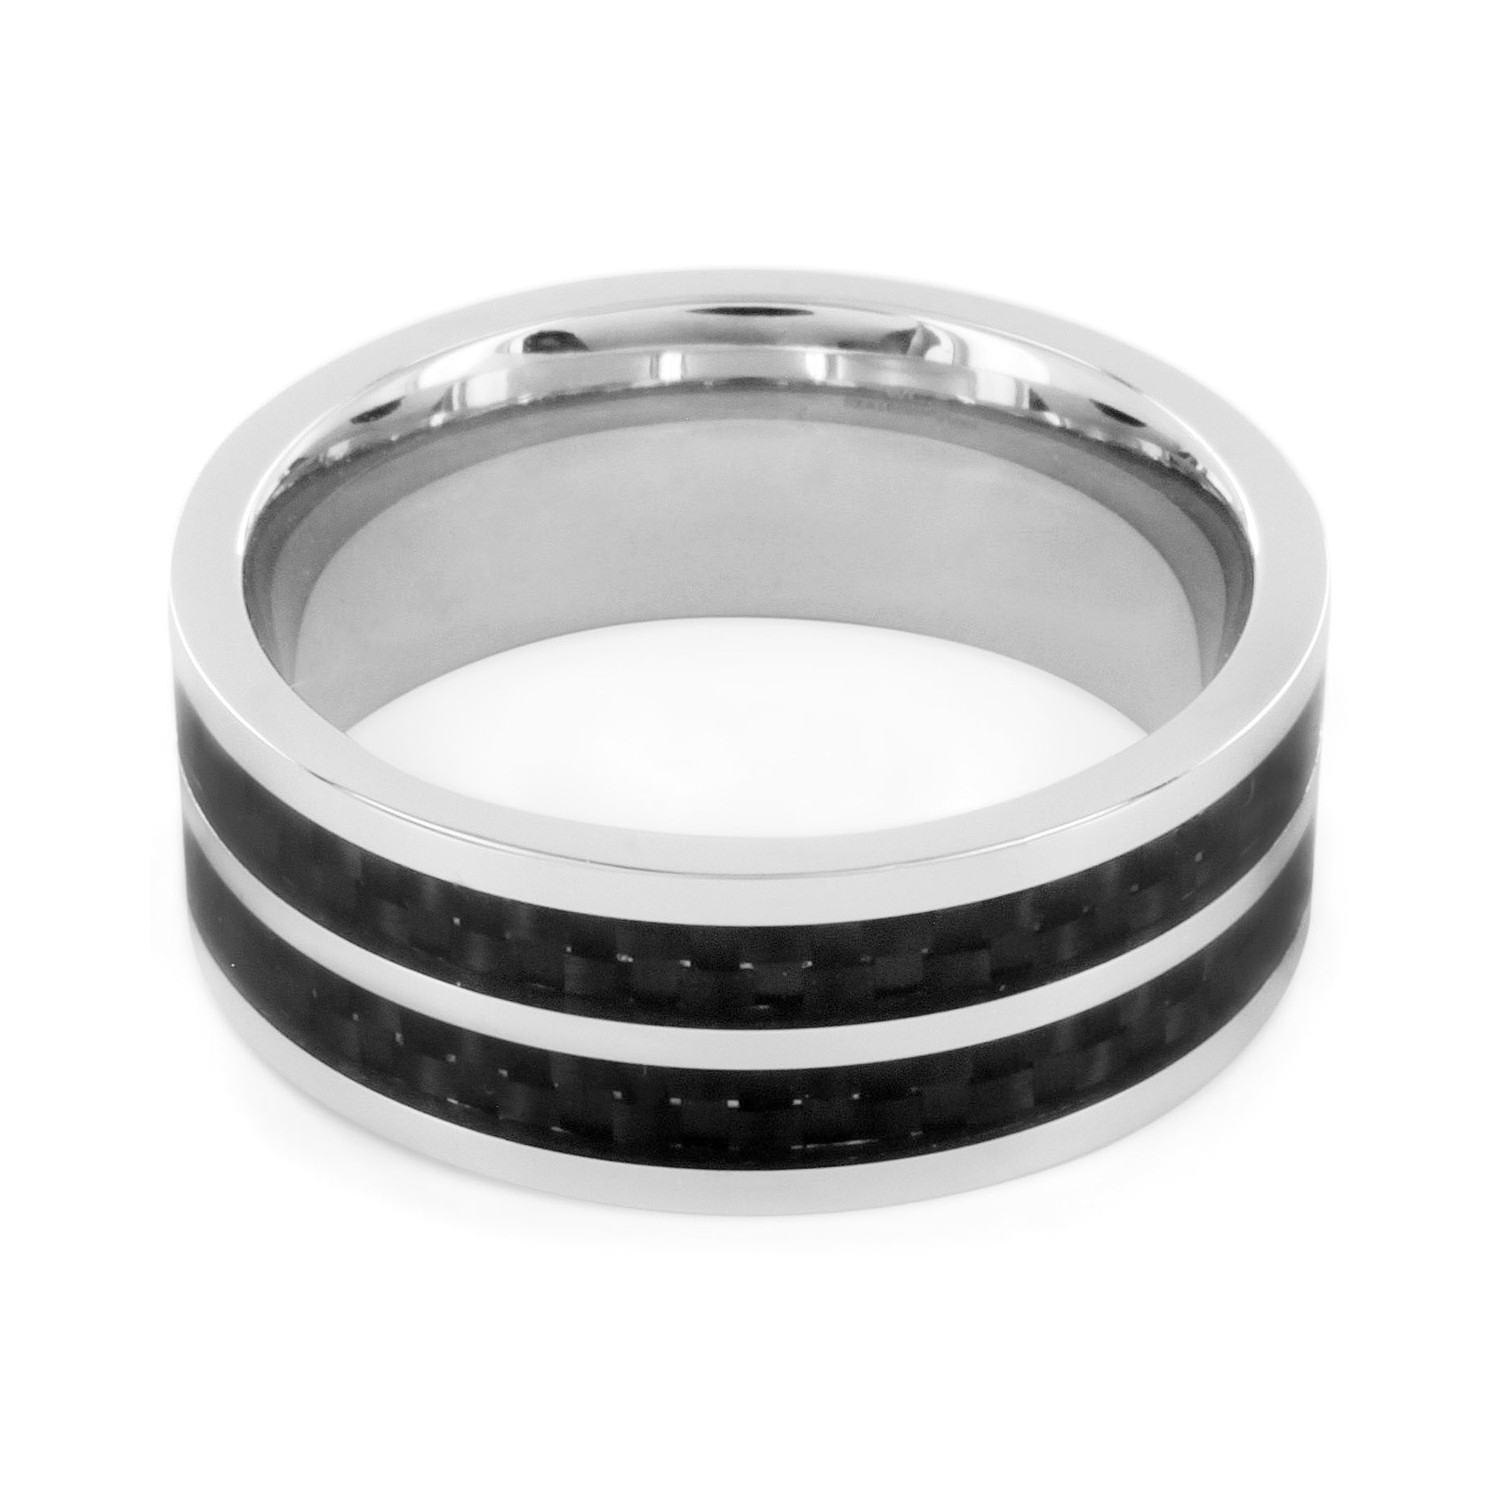 Crucible Stainless Steel Black Striped Carbon Fiber Inlay Ring (Size 8